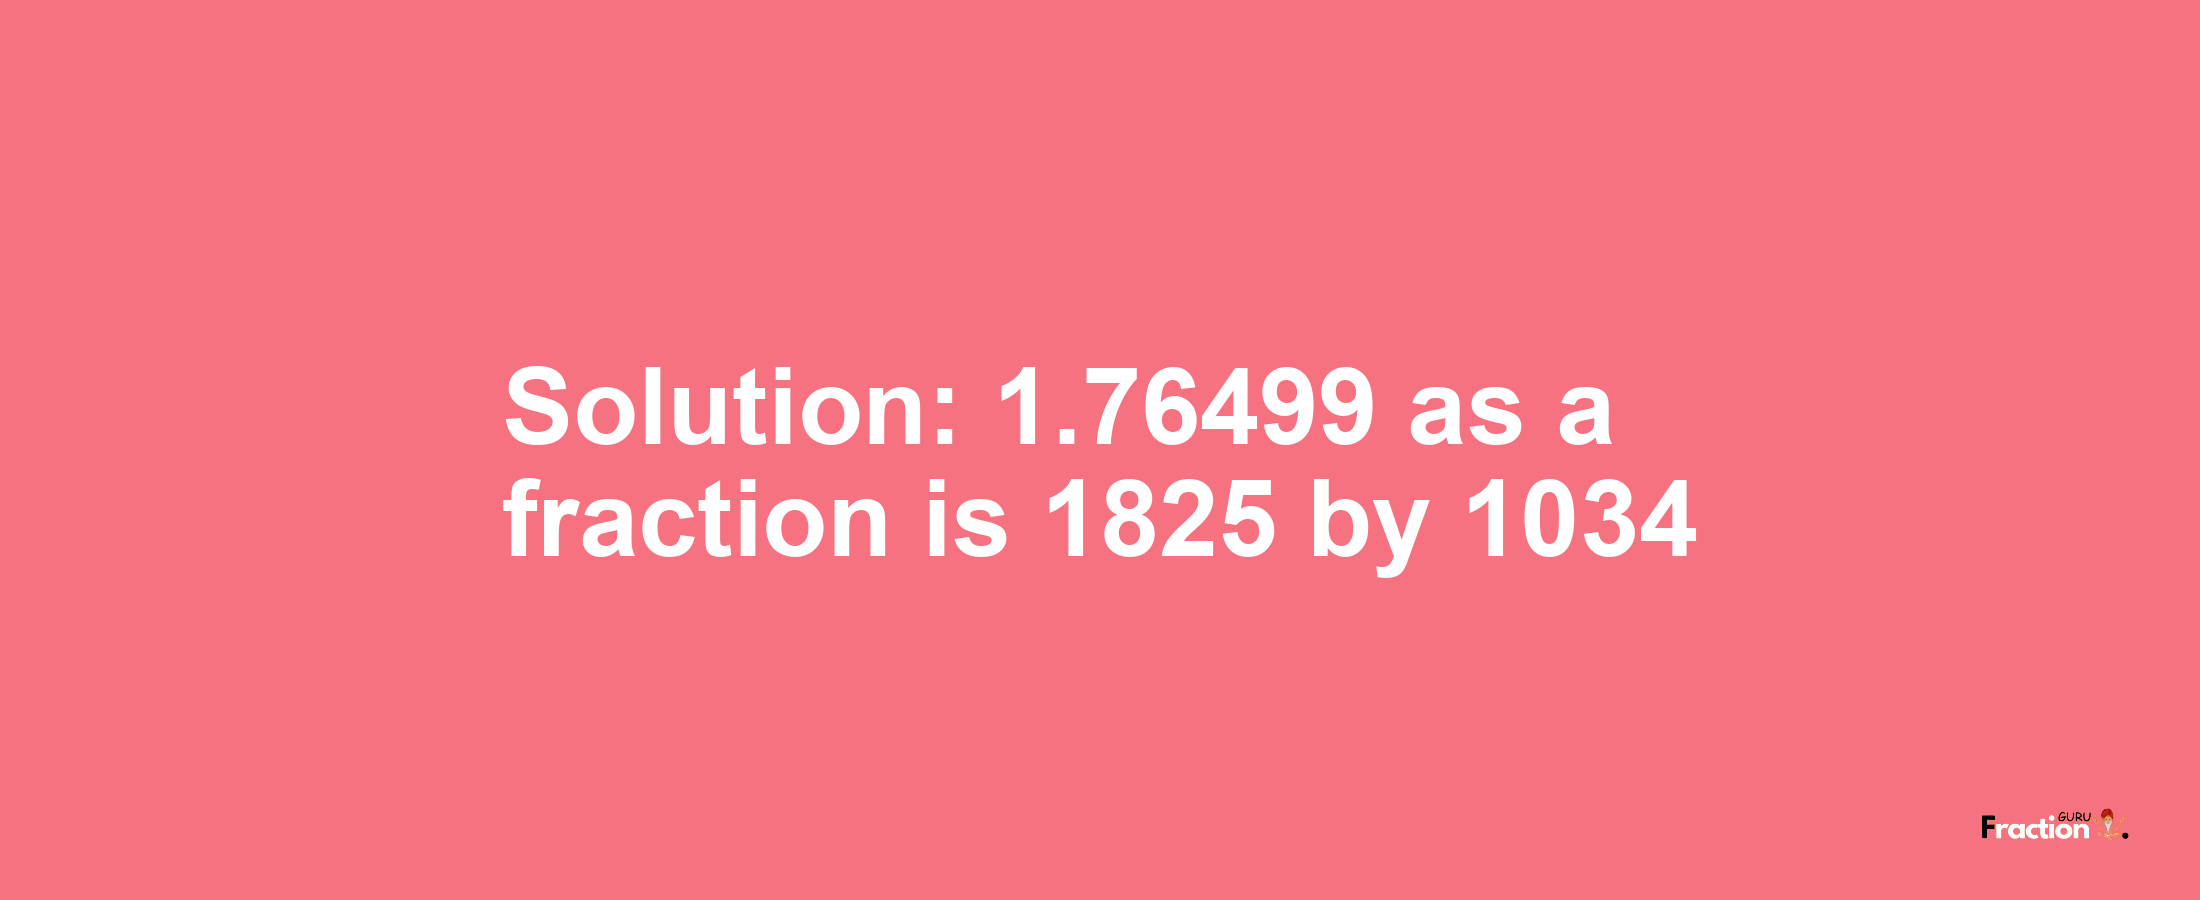 Solution:1.76499 as a fraction is 1825/1034